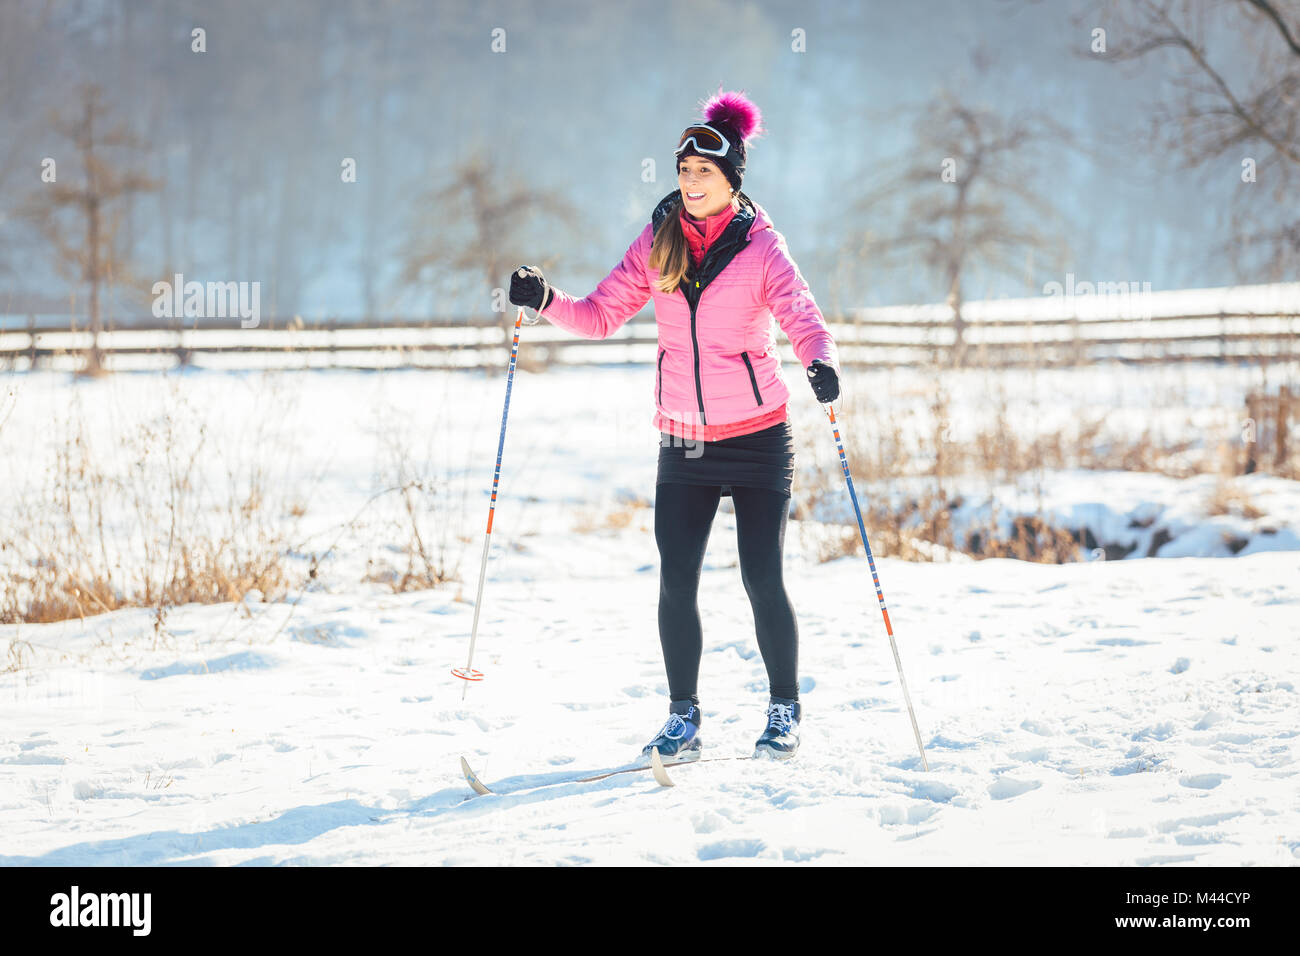 Woman doing cross country skiing as winter sport Stock Photo